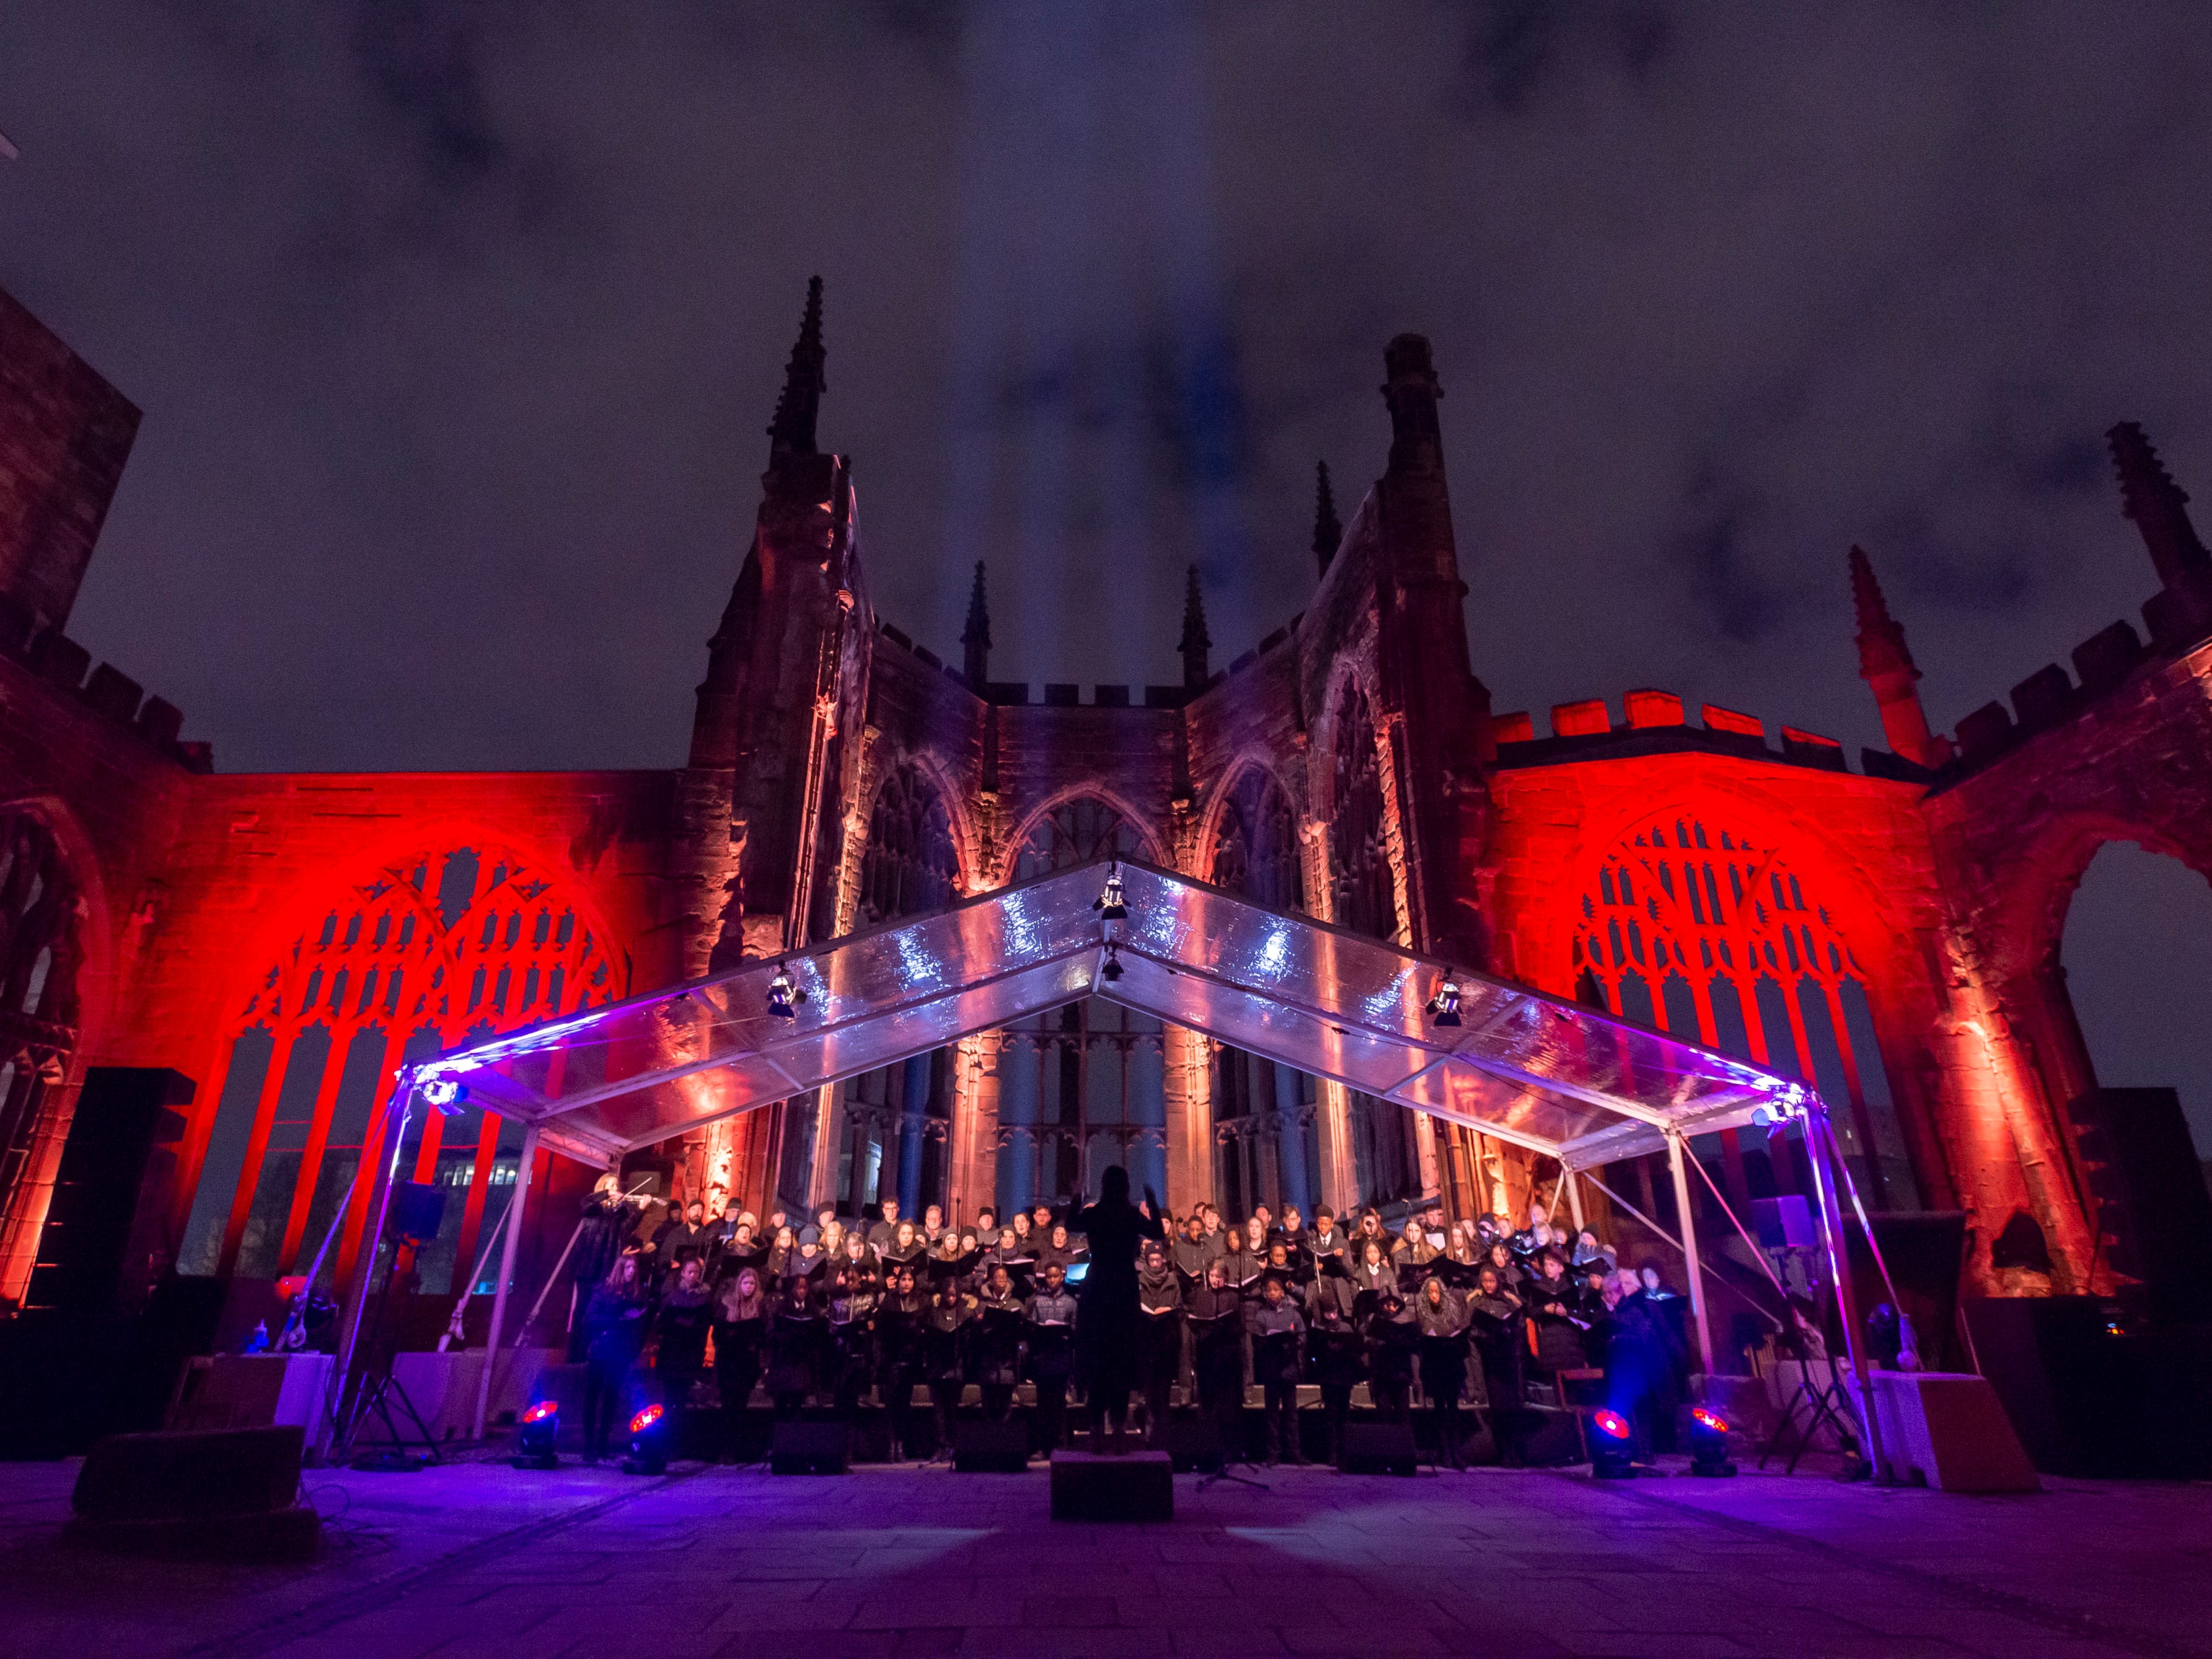 The choir performs during a Ghosts in the Ruins dress rehearsal at Coventry cathedral